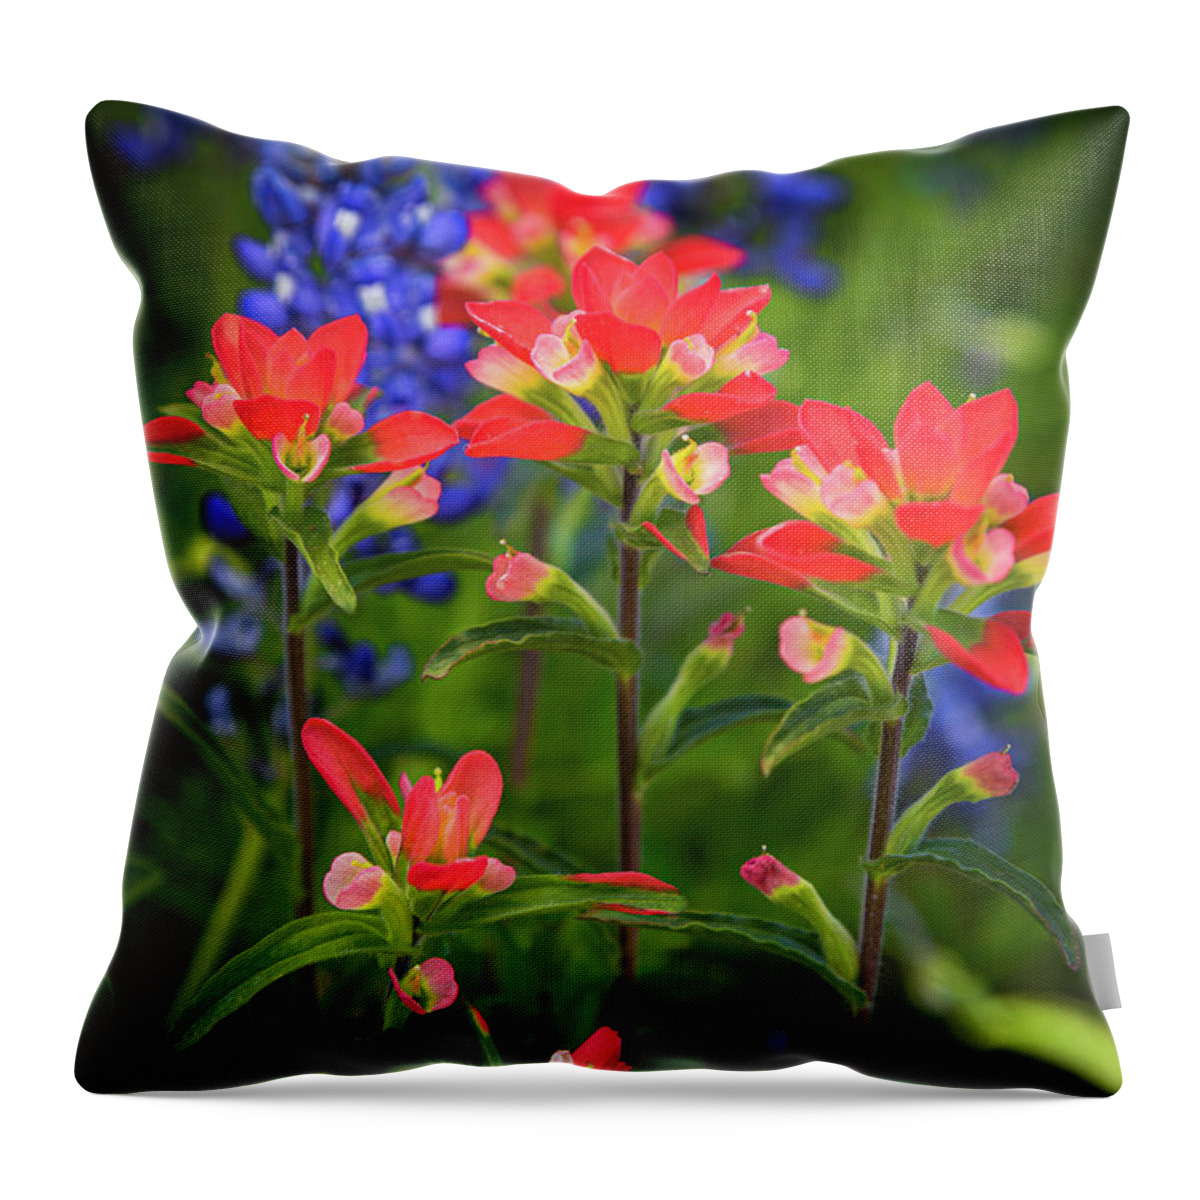 America Throw Pillow featuring the photograph Lone Star Blooms by Inge Johnsson